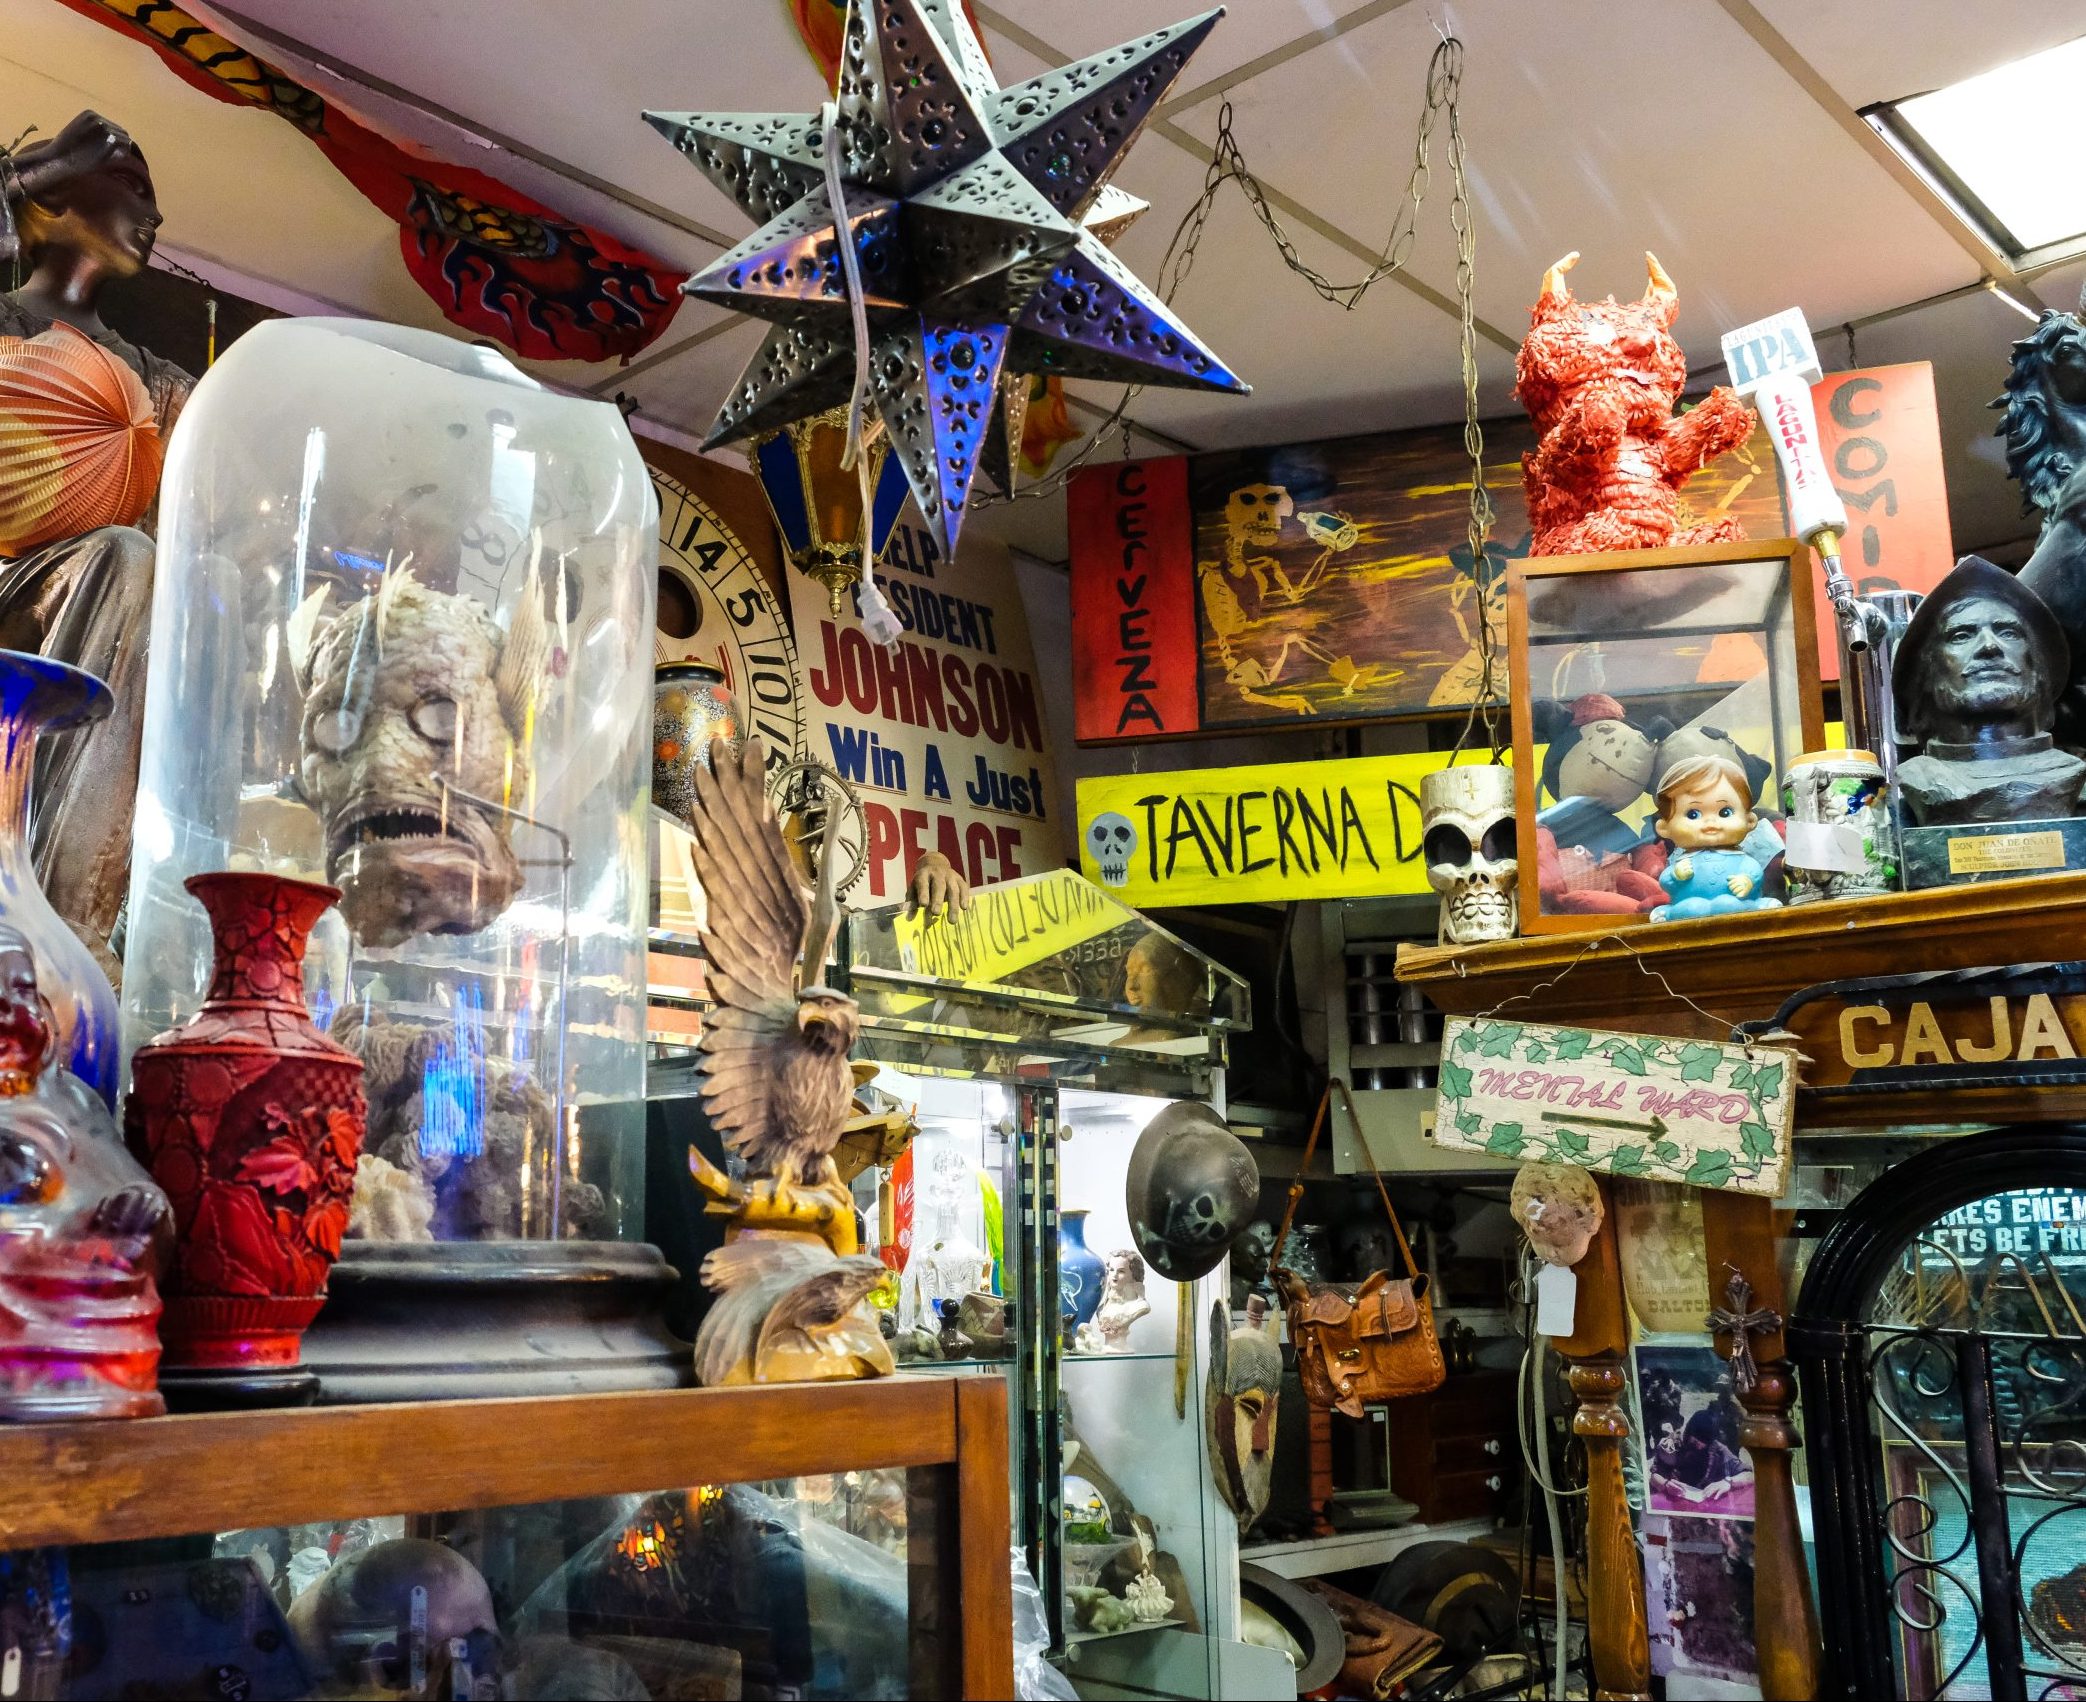 Daves A Pawn Shop Is Filled To The Brim With Historical Eclectic